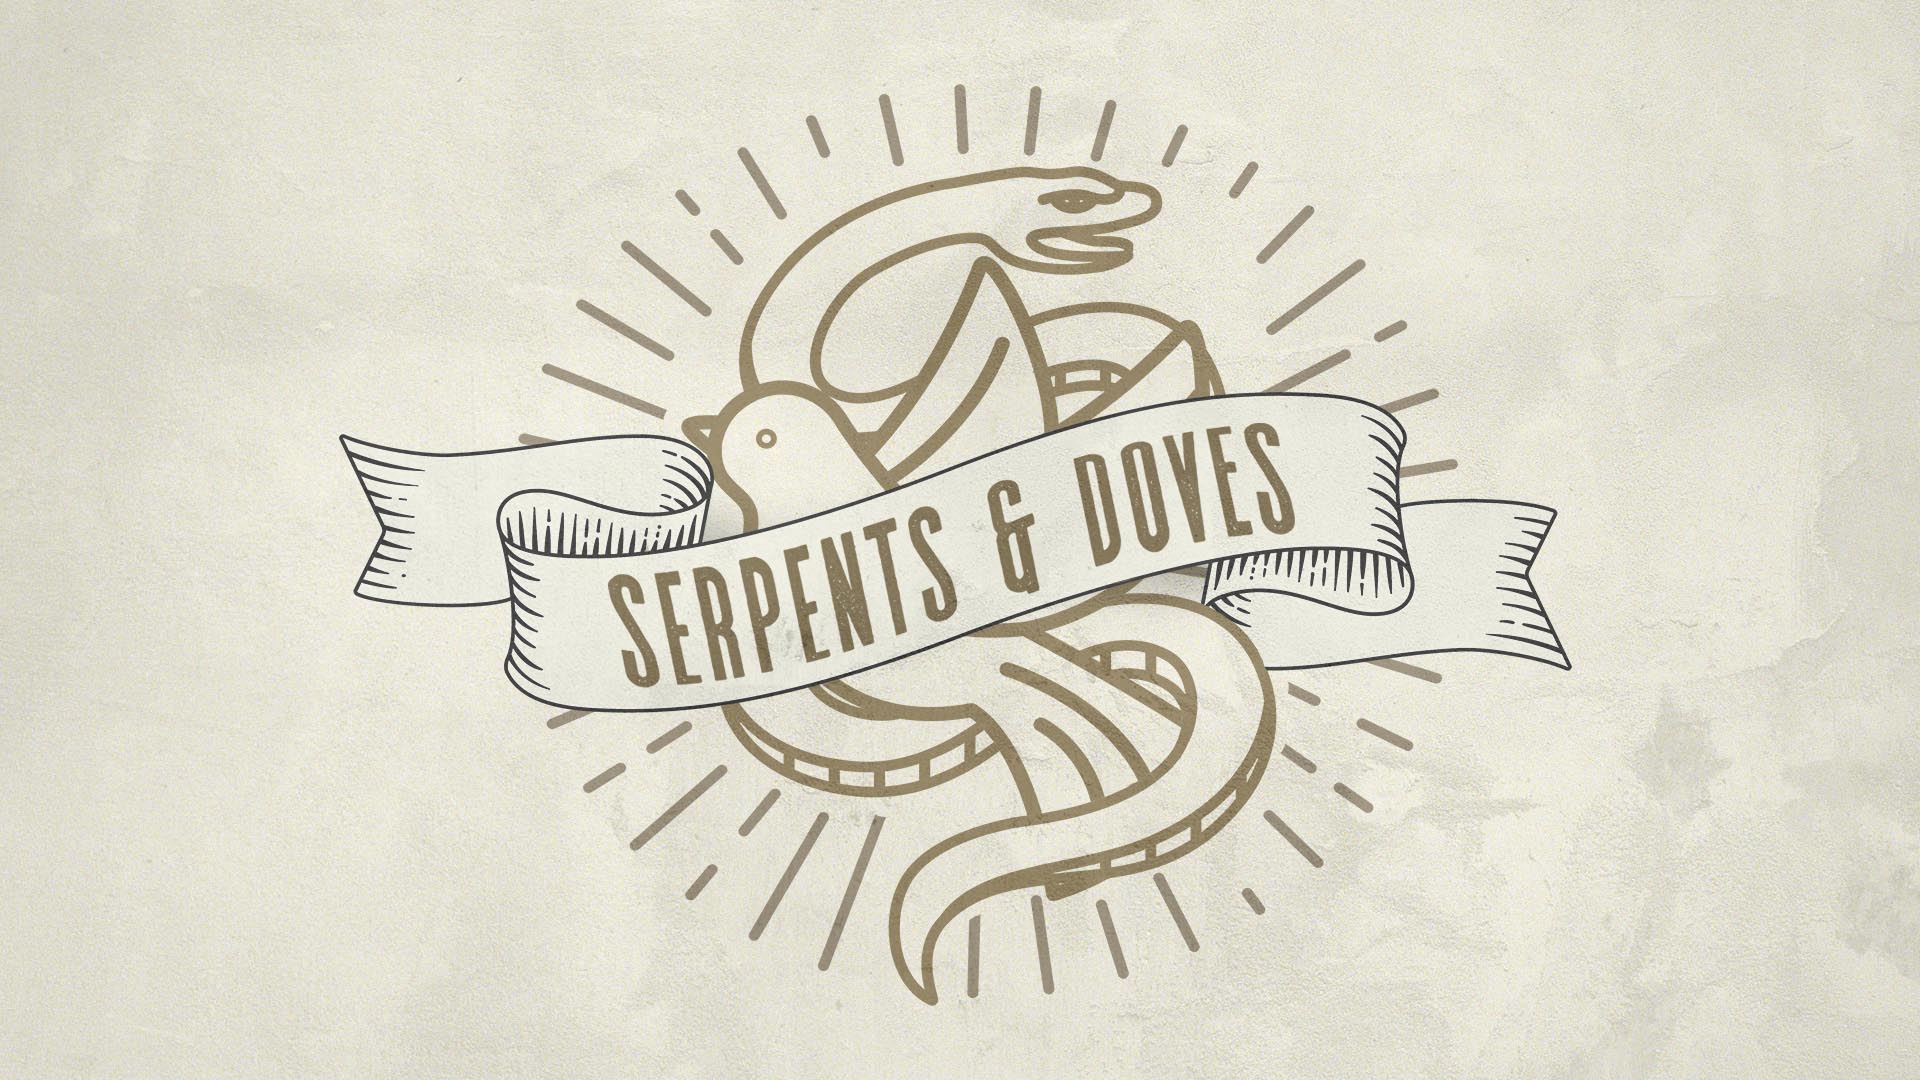 "Serpents & Doves" Message Series